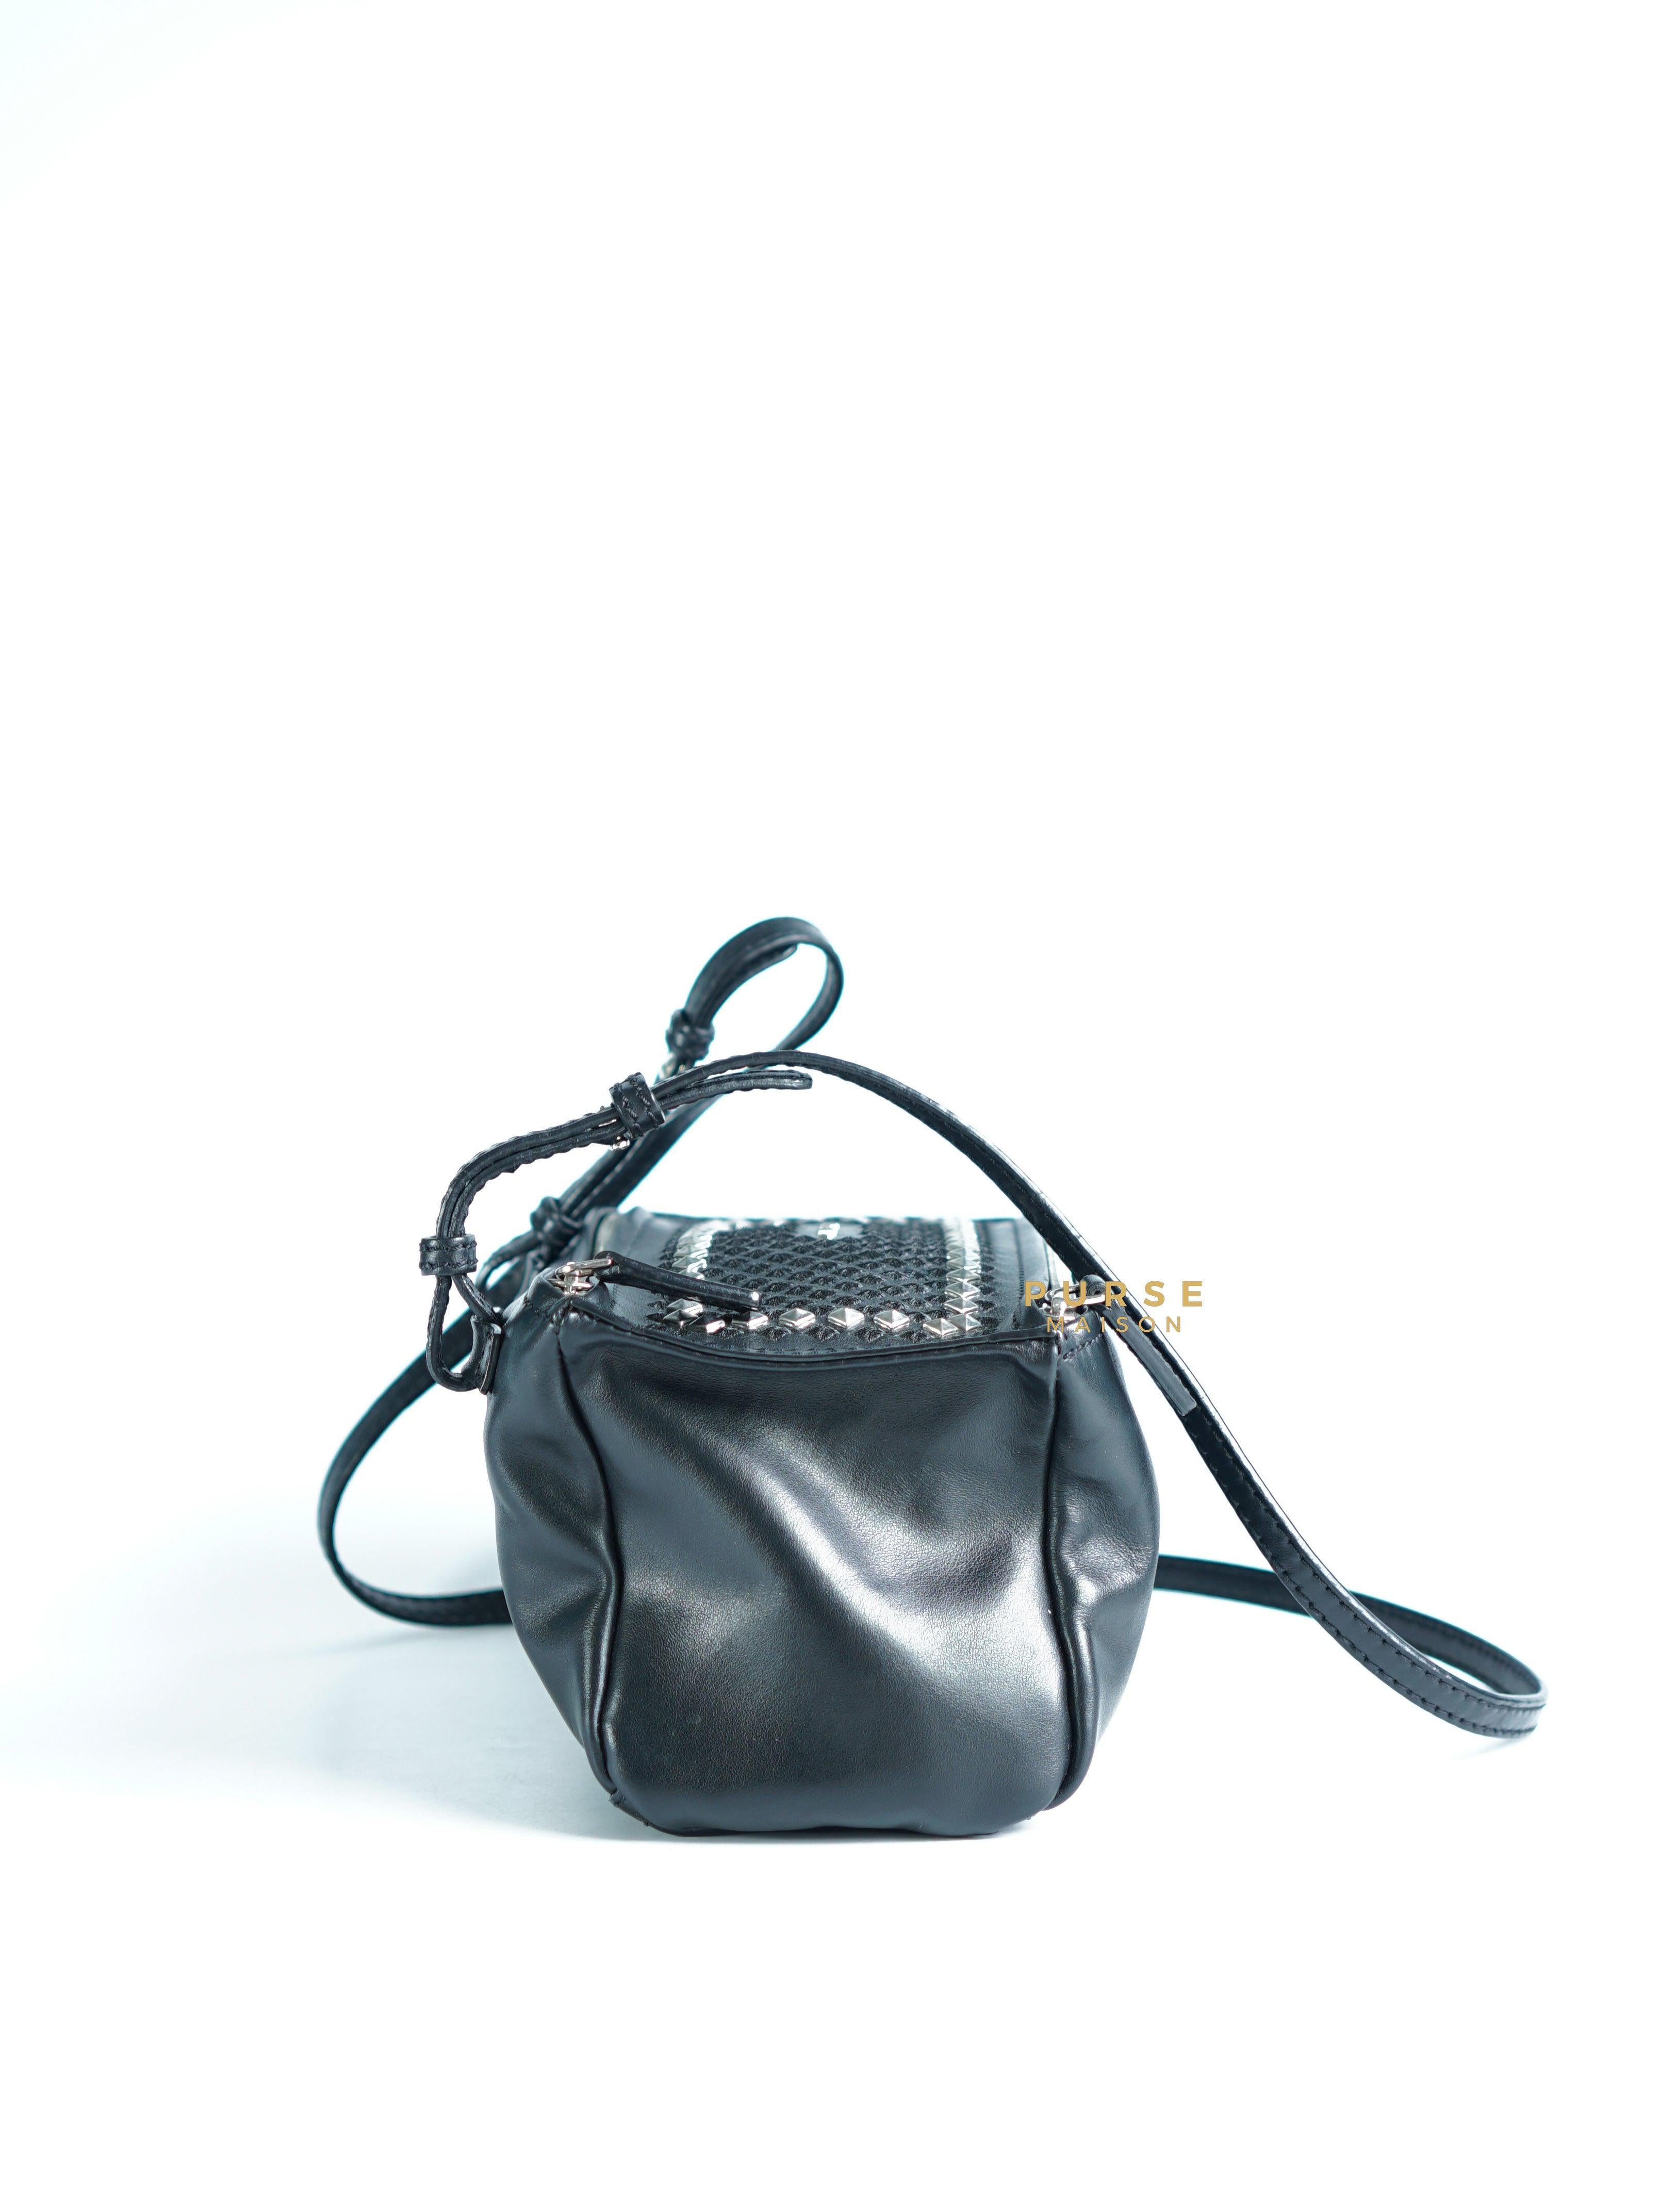 Givenchy Mini Pandora Studded Black Bag in Smooth Leather | Purse Maison Luxury Bags Shop